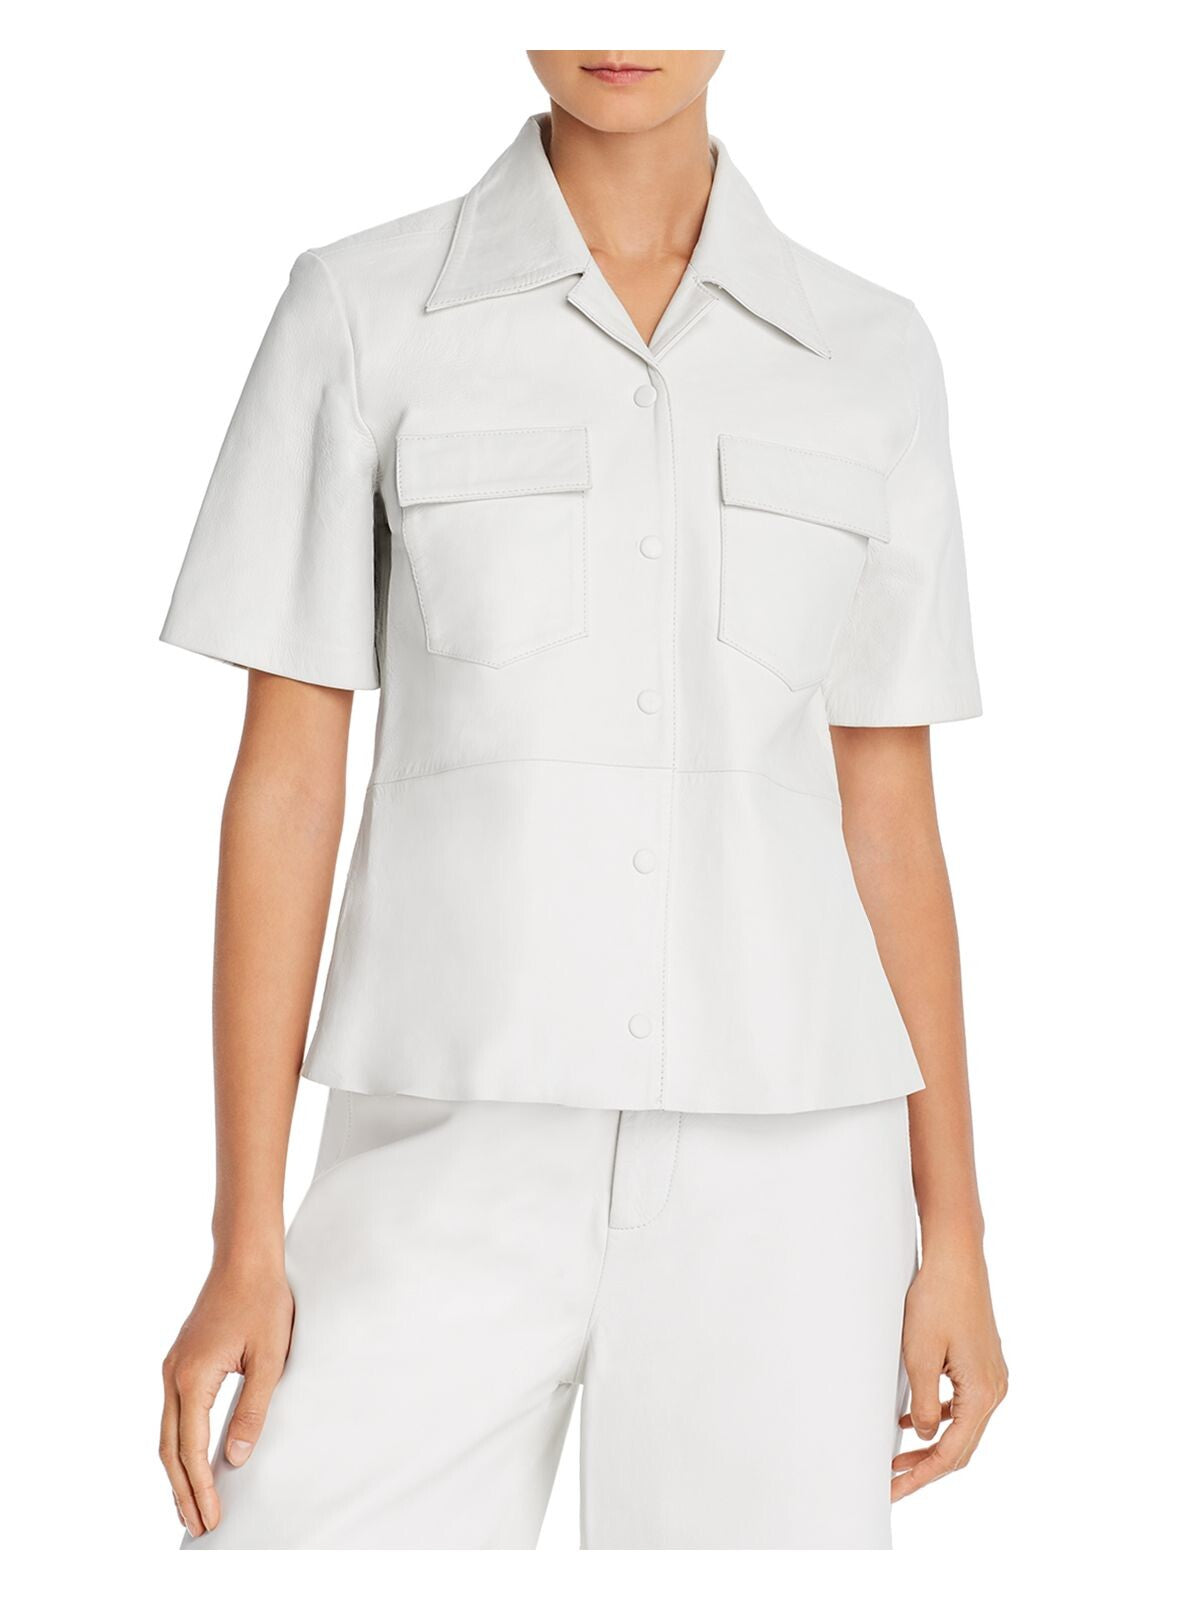 REMAIN Womens White Pocketed Snap Closure Utility Shirt Short Sleeve Collared Button Up Top 6